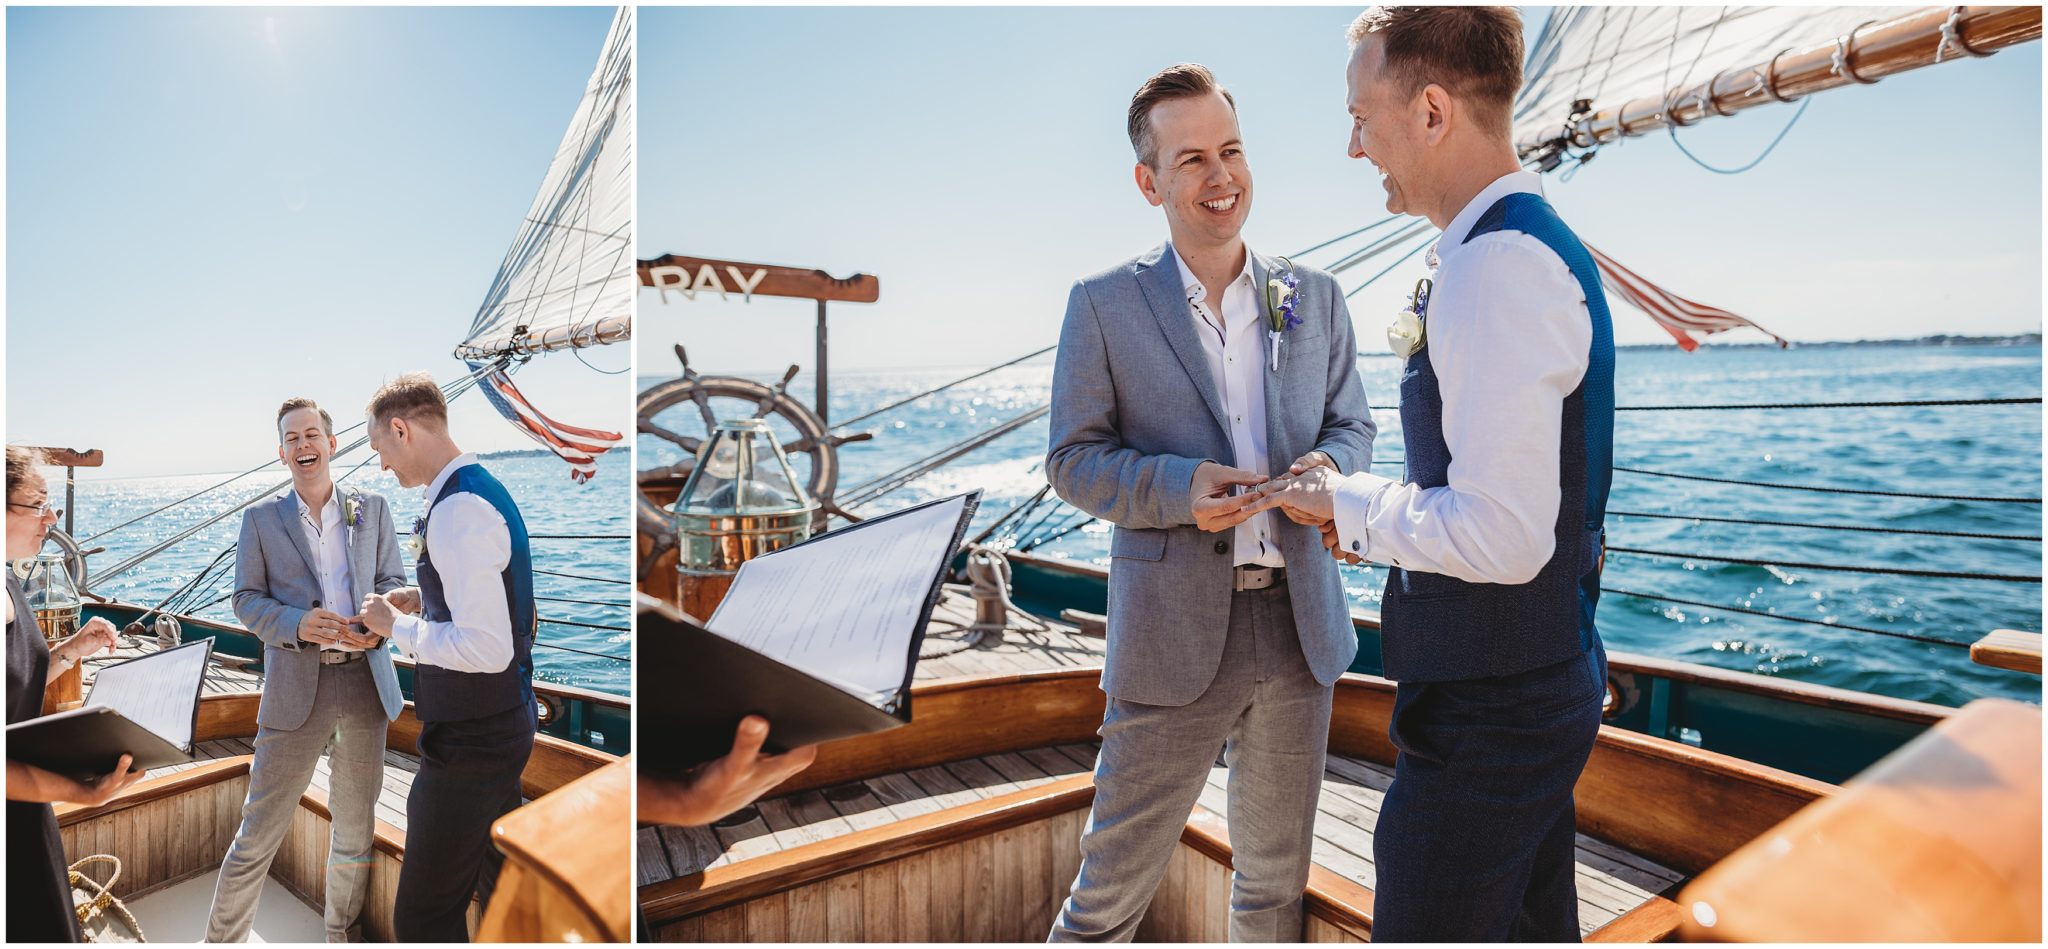 groom laughing during boat ceremony - new england elopement photography